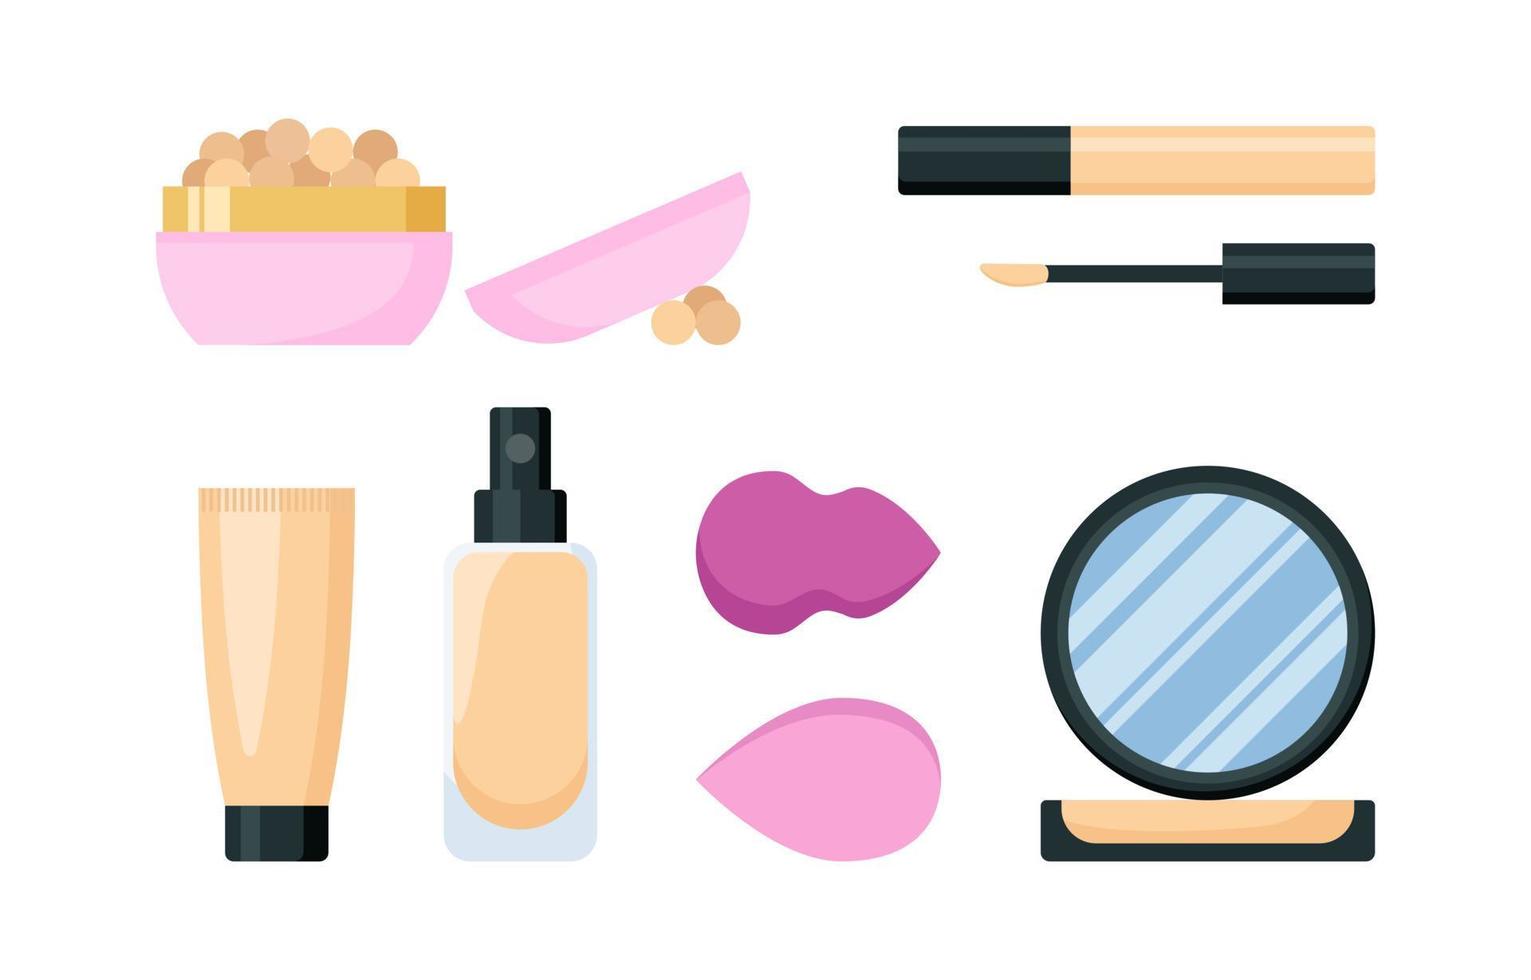 Make up foundation cream cosmetic set. Face tone products and accessories, eye concealer, blushes and powder in bright colors flat design. Isolated vector illustration.